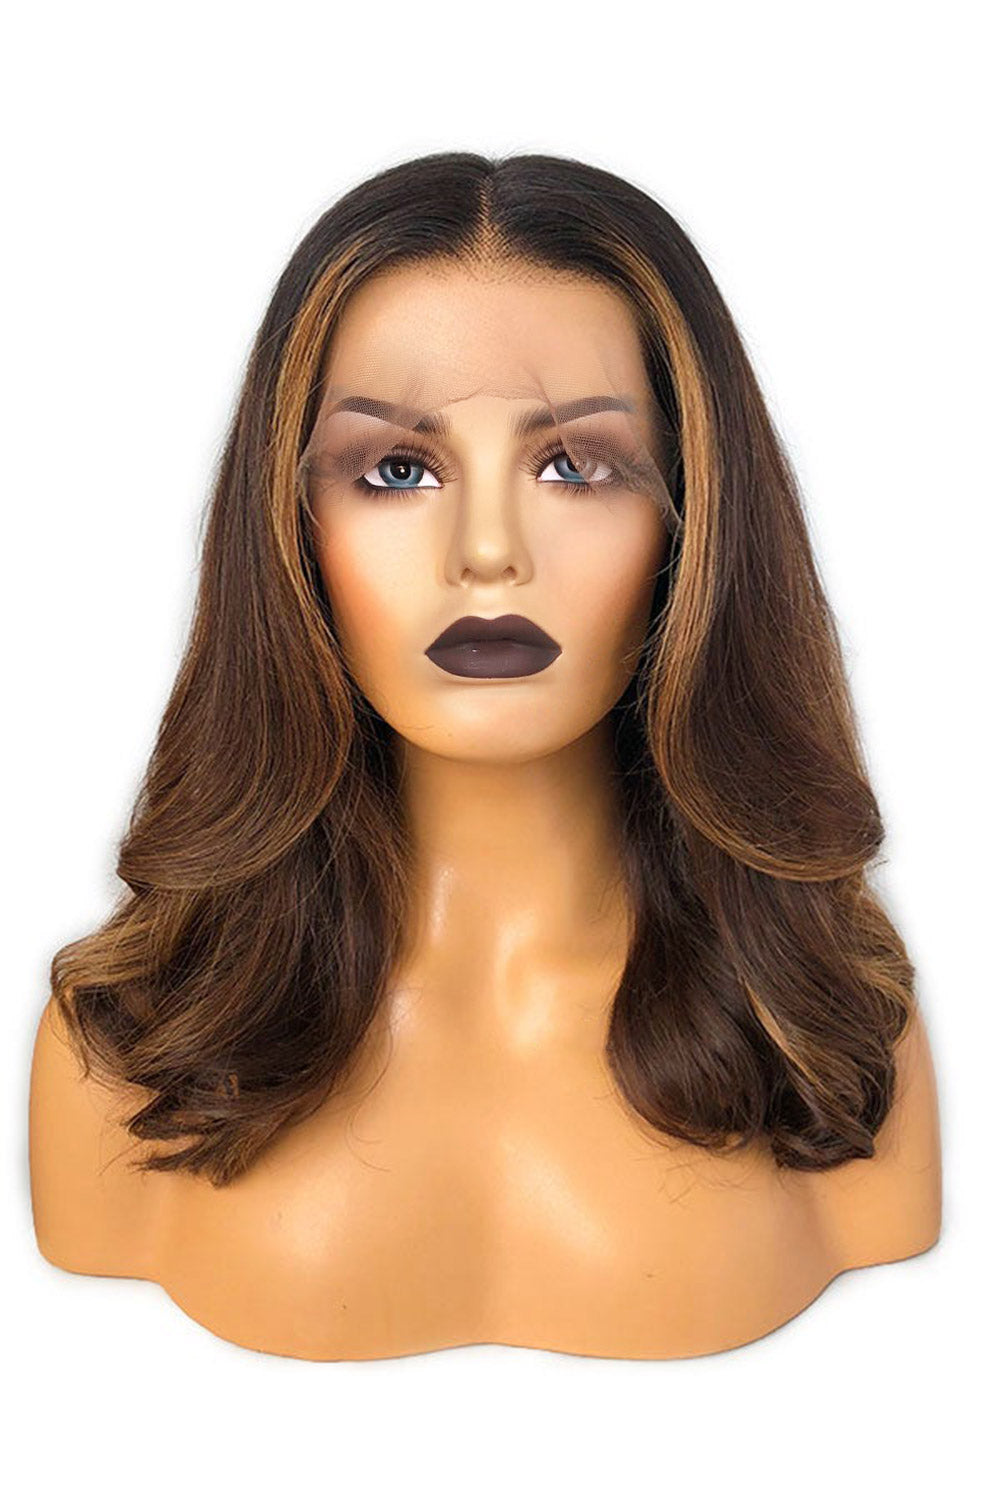 ygwigs 13x6 hd lace brown color wigs13*6 HD Lace Fake Scalp Wigs Ombre Dark Brown Long Body Wavy Glueless